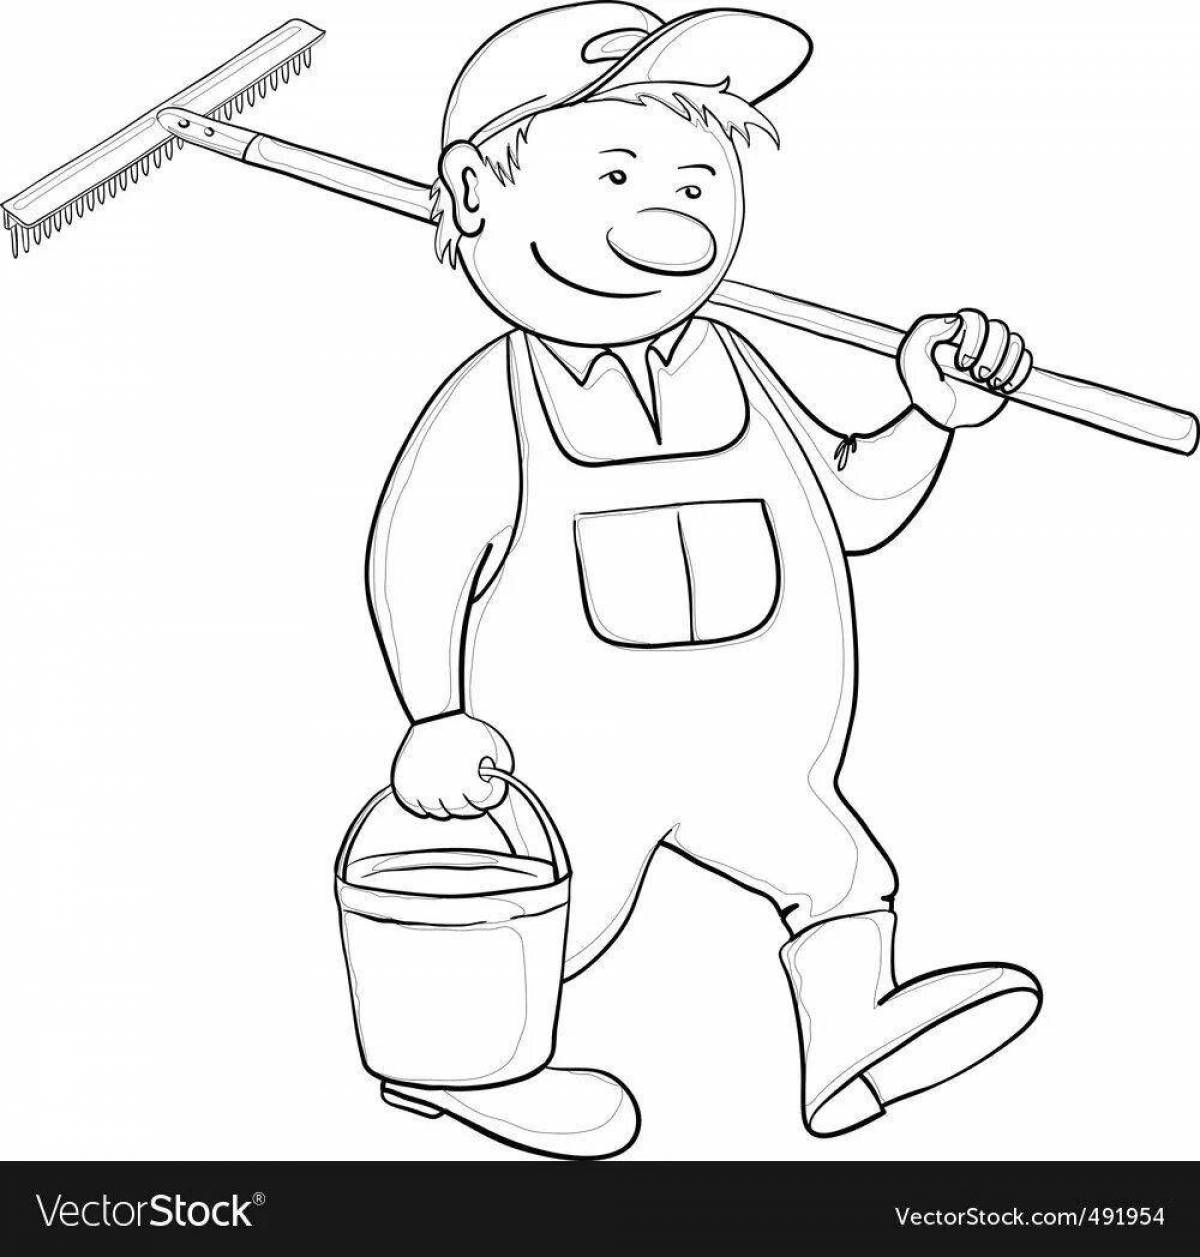 Adorable gardener coloring page for kids